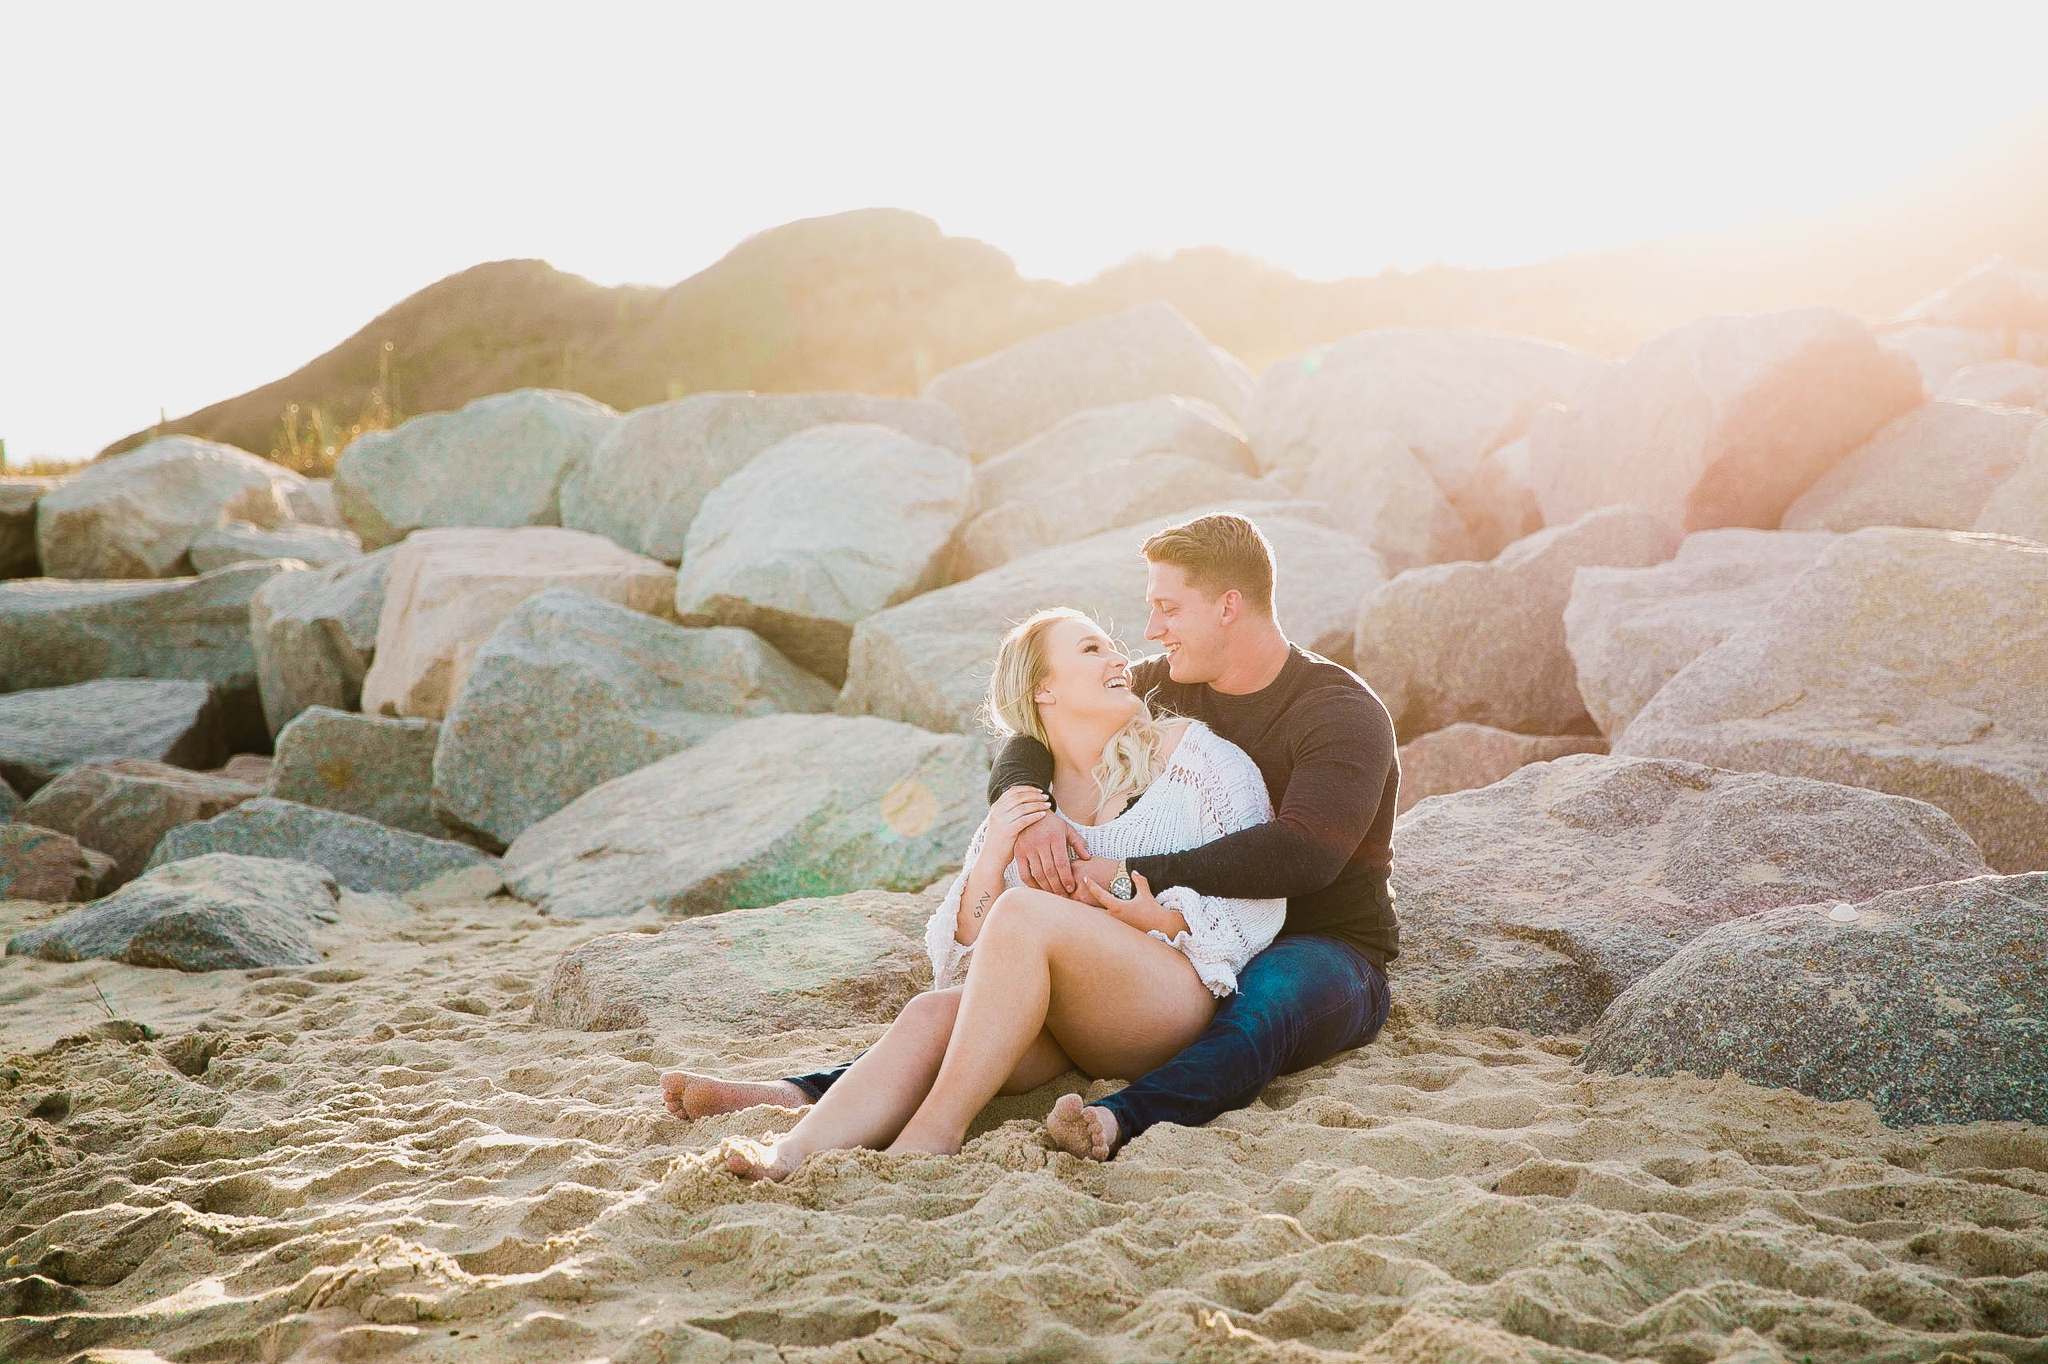  couple looking at the ocean while sitting on a sandy beach at sunset with golden hour light shining onto them - girl wearing ripped jeans shorts and a white free people sweater - Casual Beach Engagement Photography Session - Honolulu Oahu Hawaii Wed